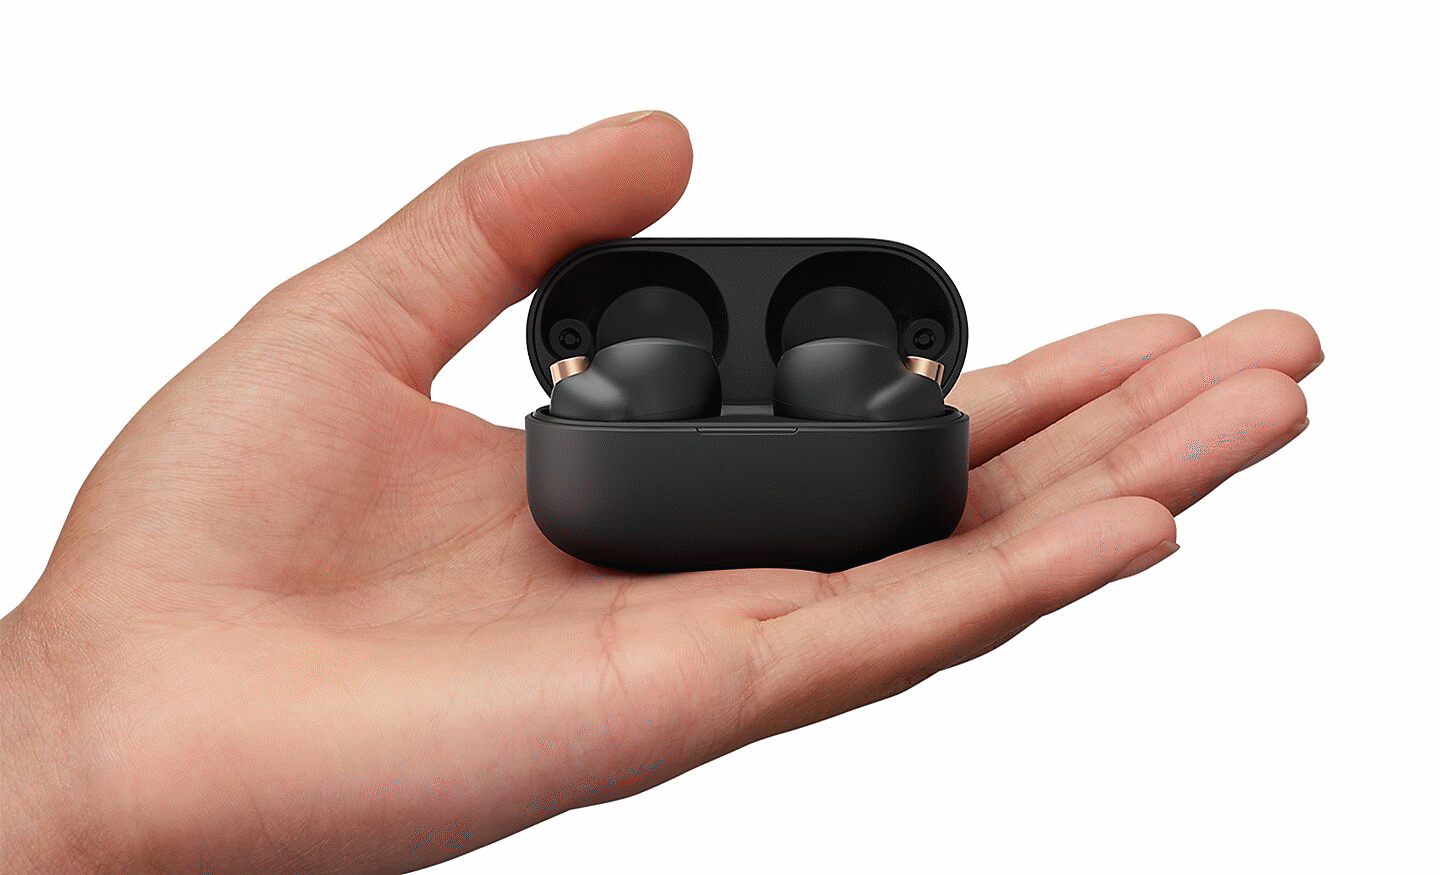 Hand holding an open charging case revealing the WF-1000XM4 headphones inside